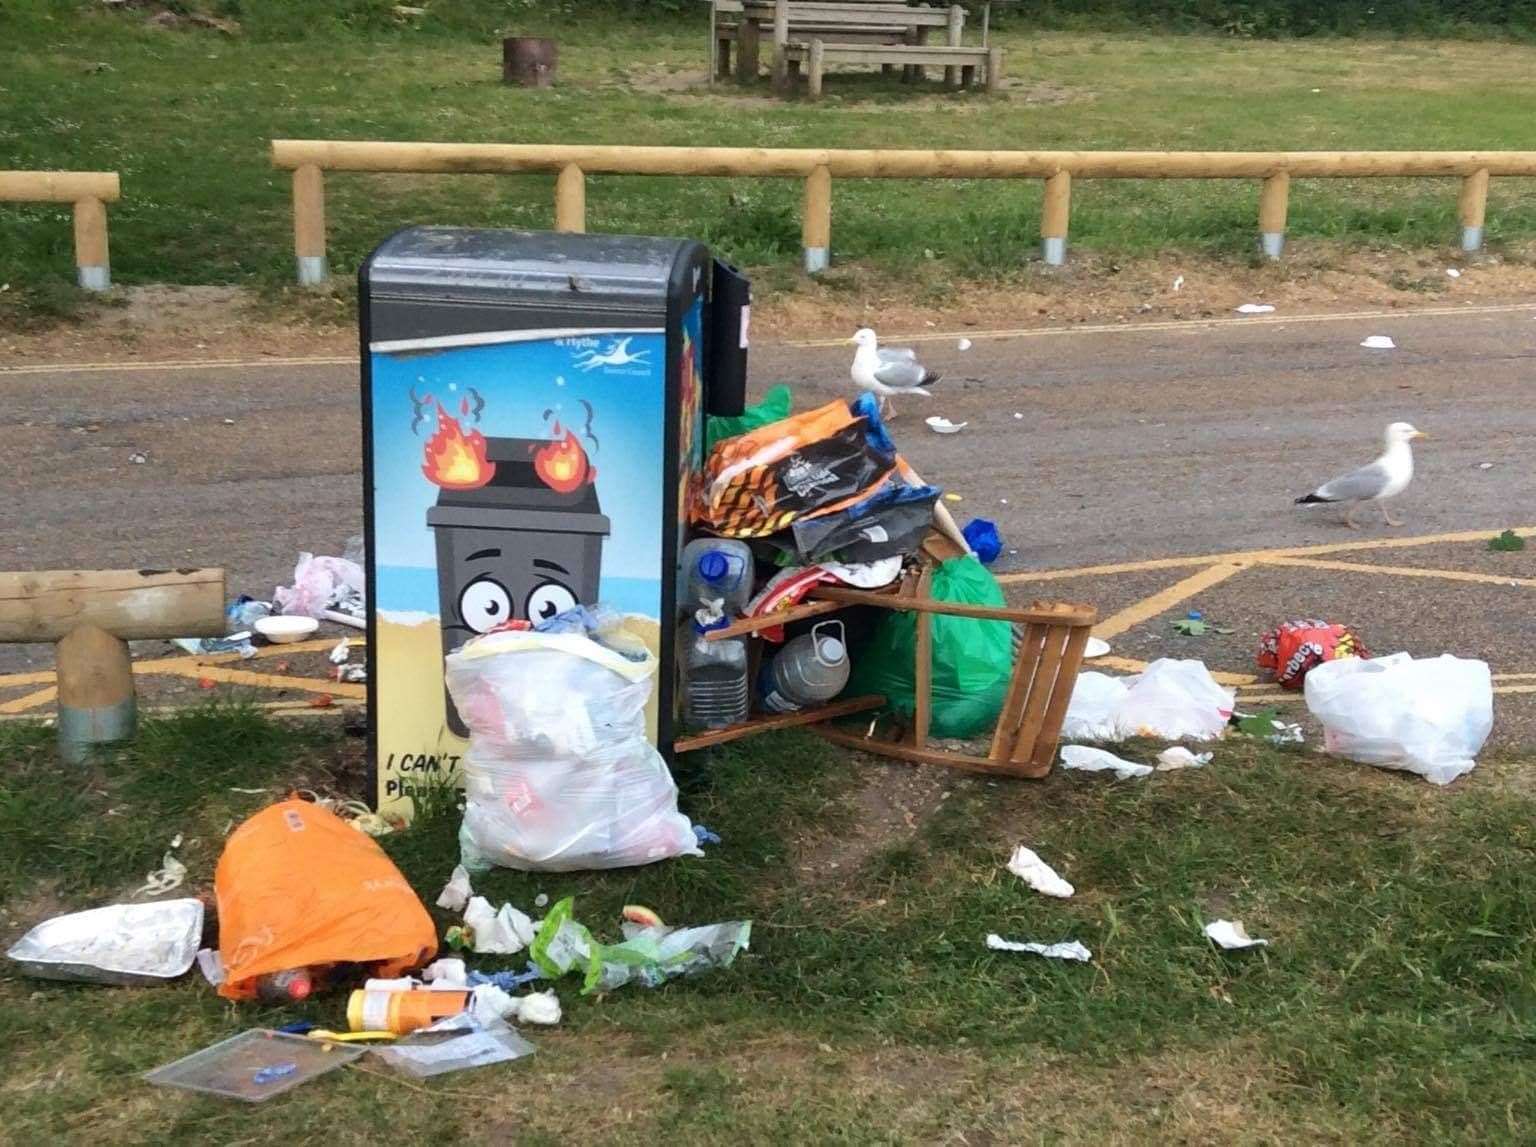 The council is now planning on adding more bins in the coastal park. Picture supplied by Cllr Prater